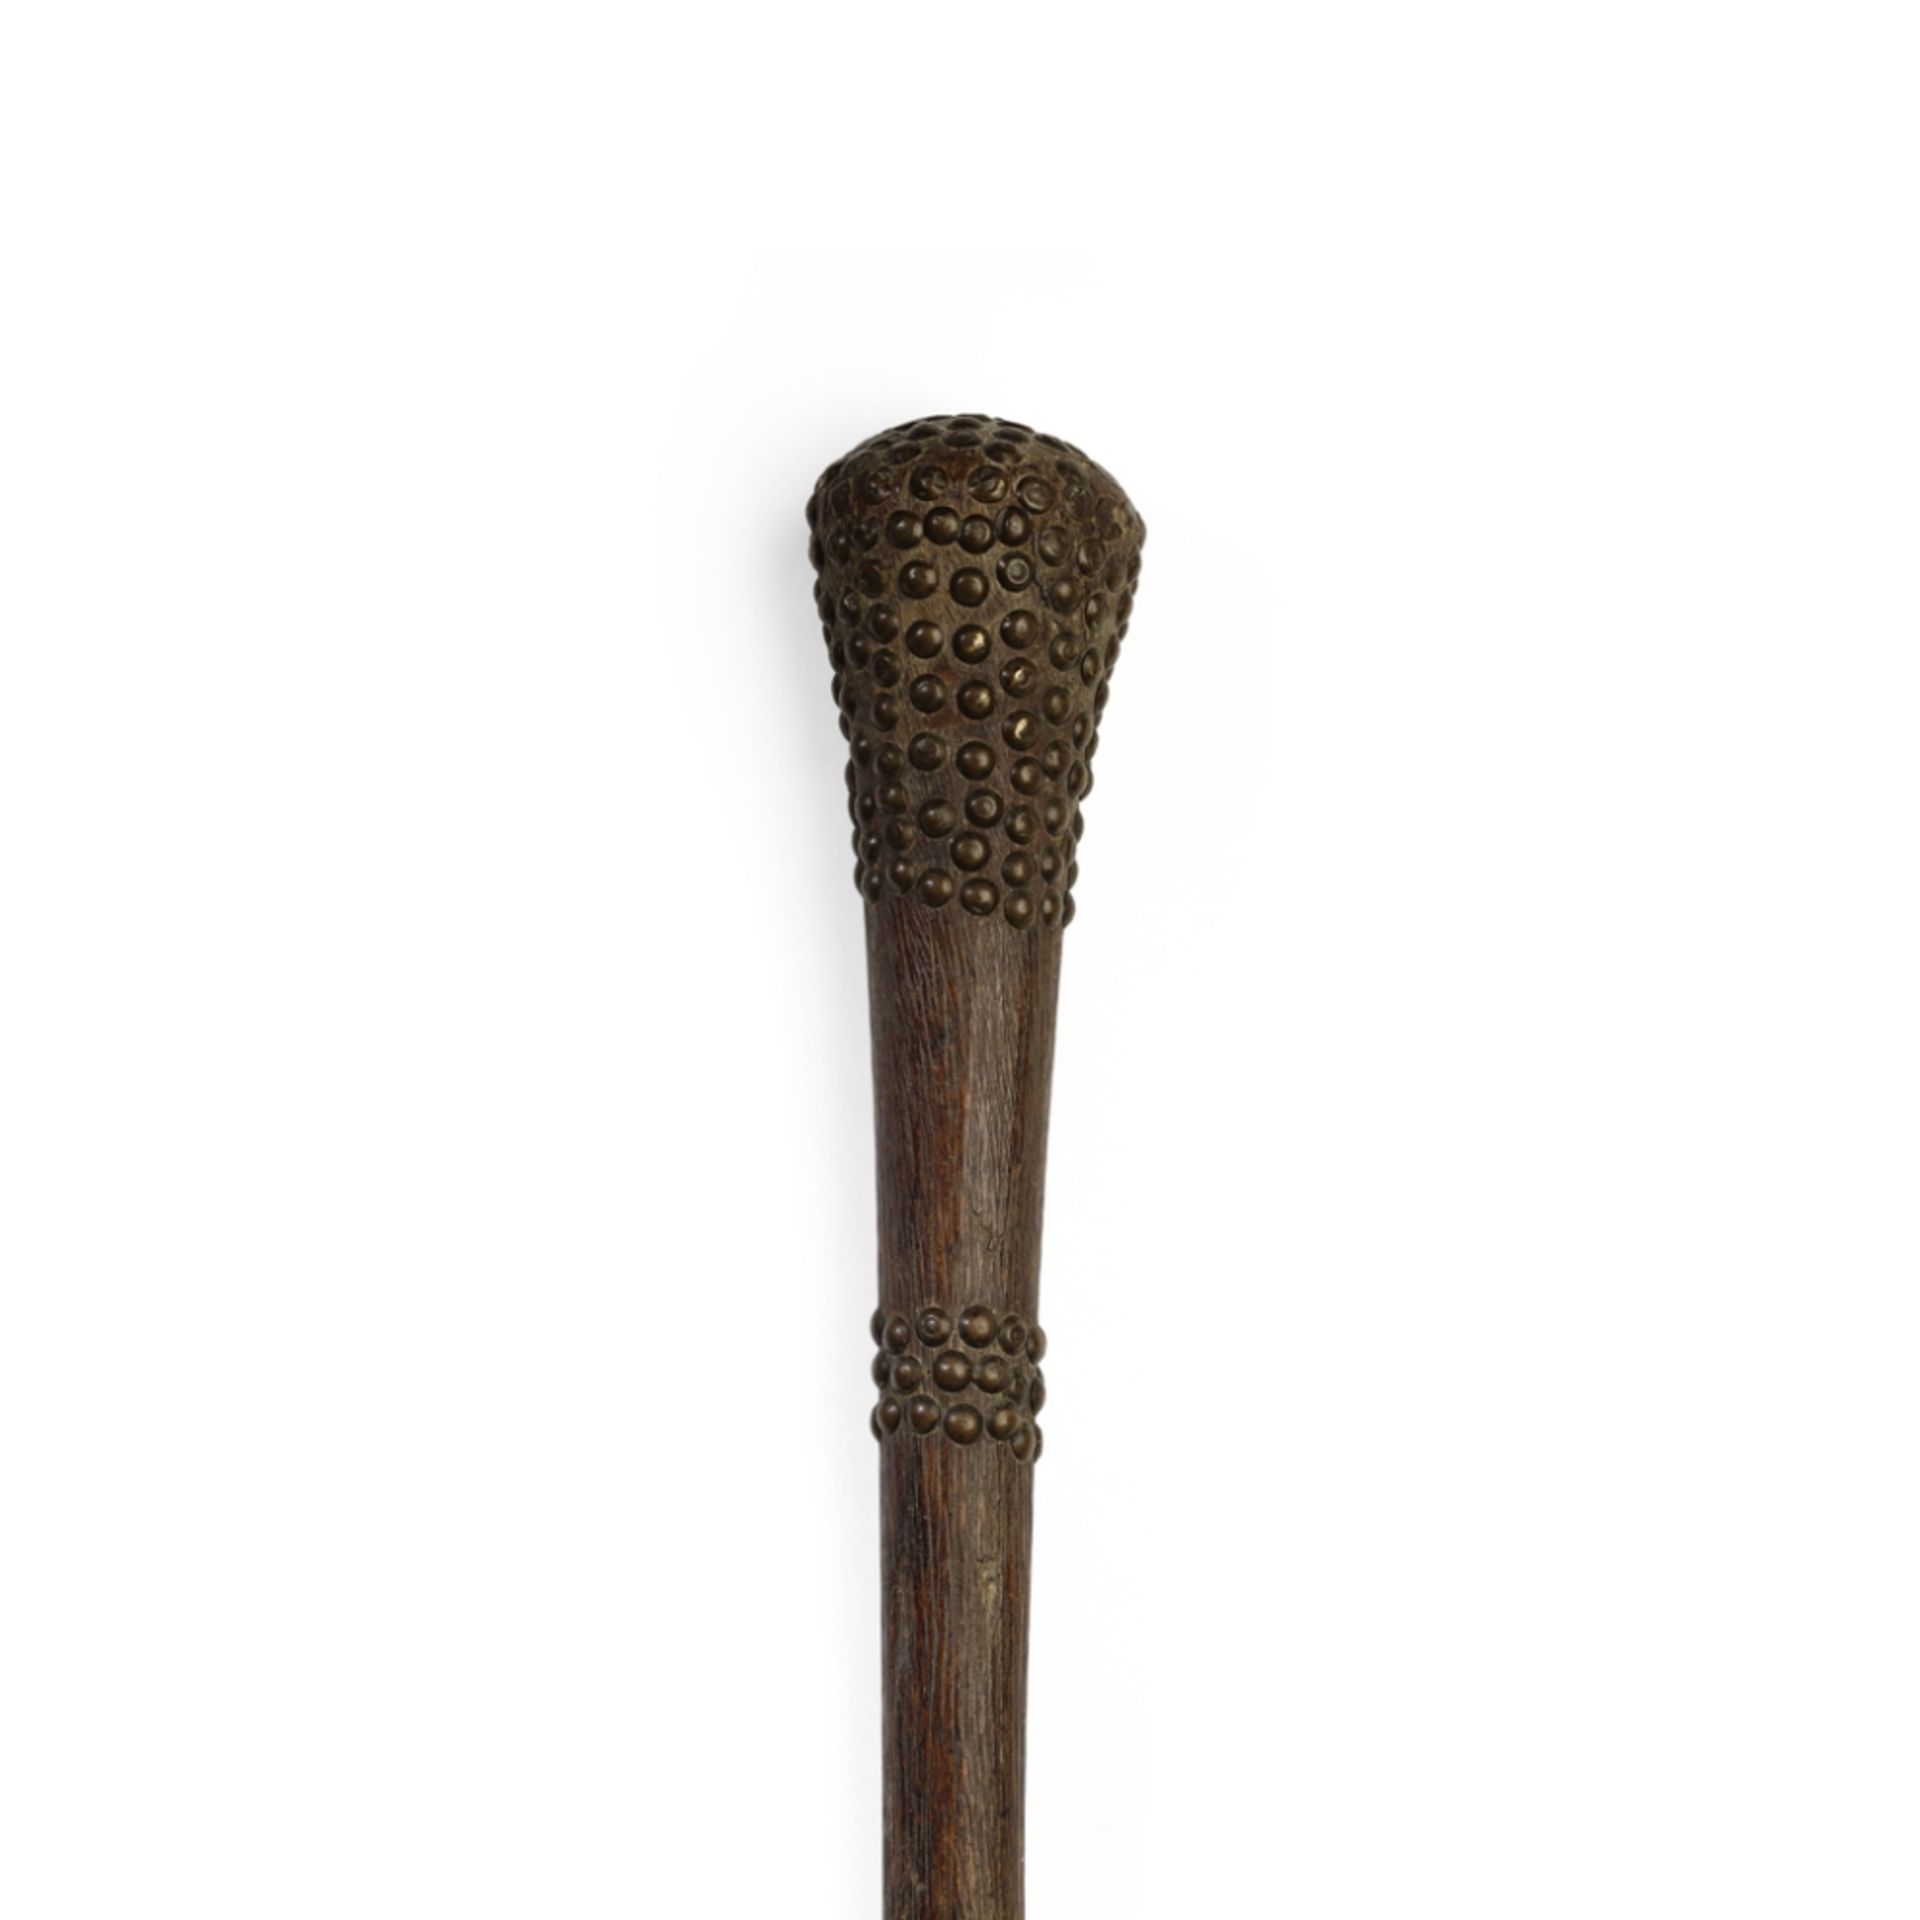 CHOKWE CLUBANGOLA carved wood and brass studs, the flaring head with multiple metal inserts, the